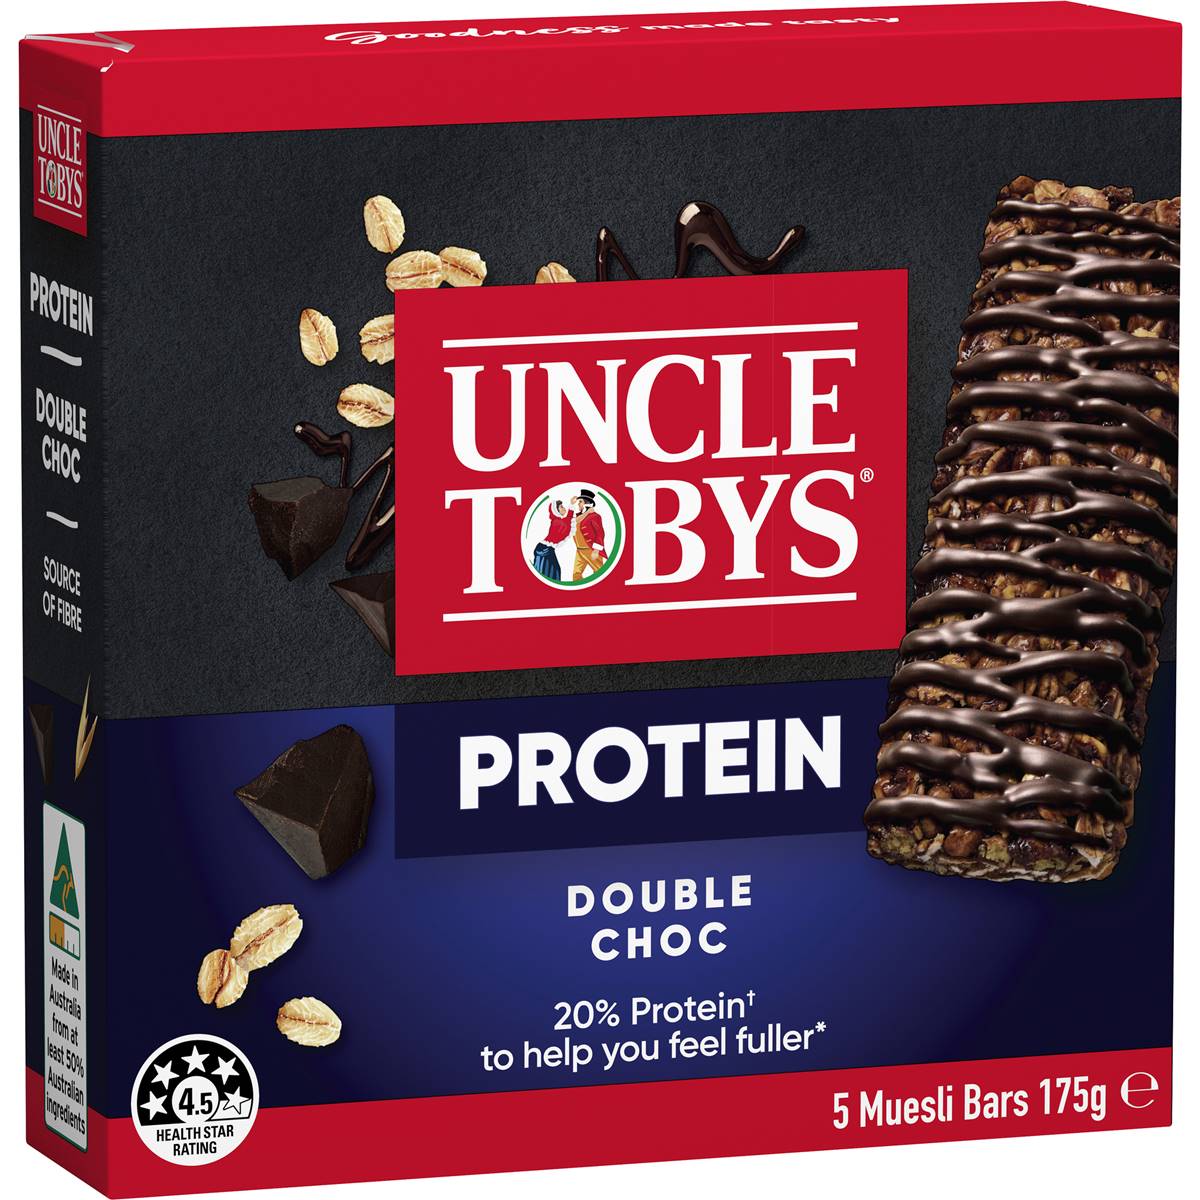 Calories in Uncle Tobys Protein Muesli Bars Double Choc